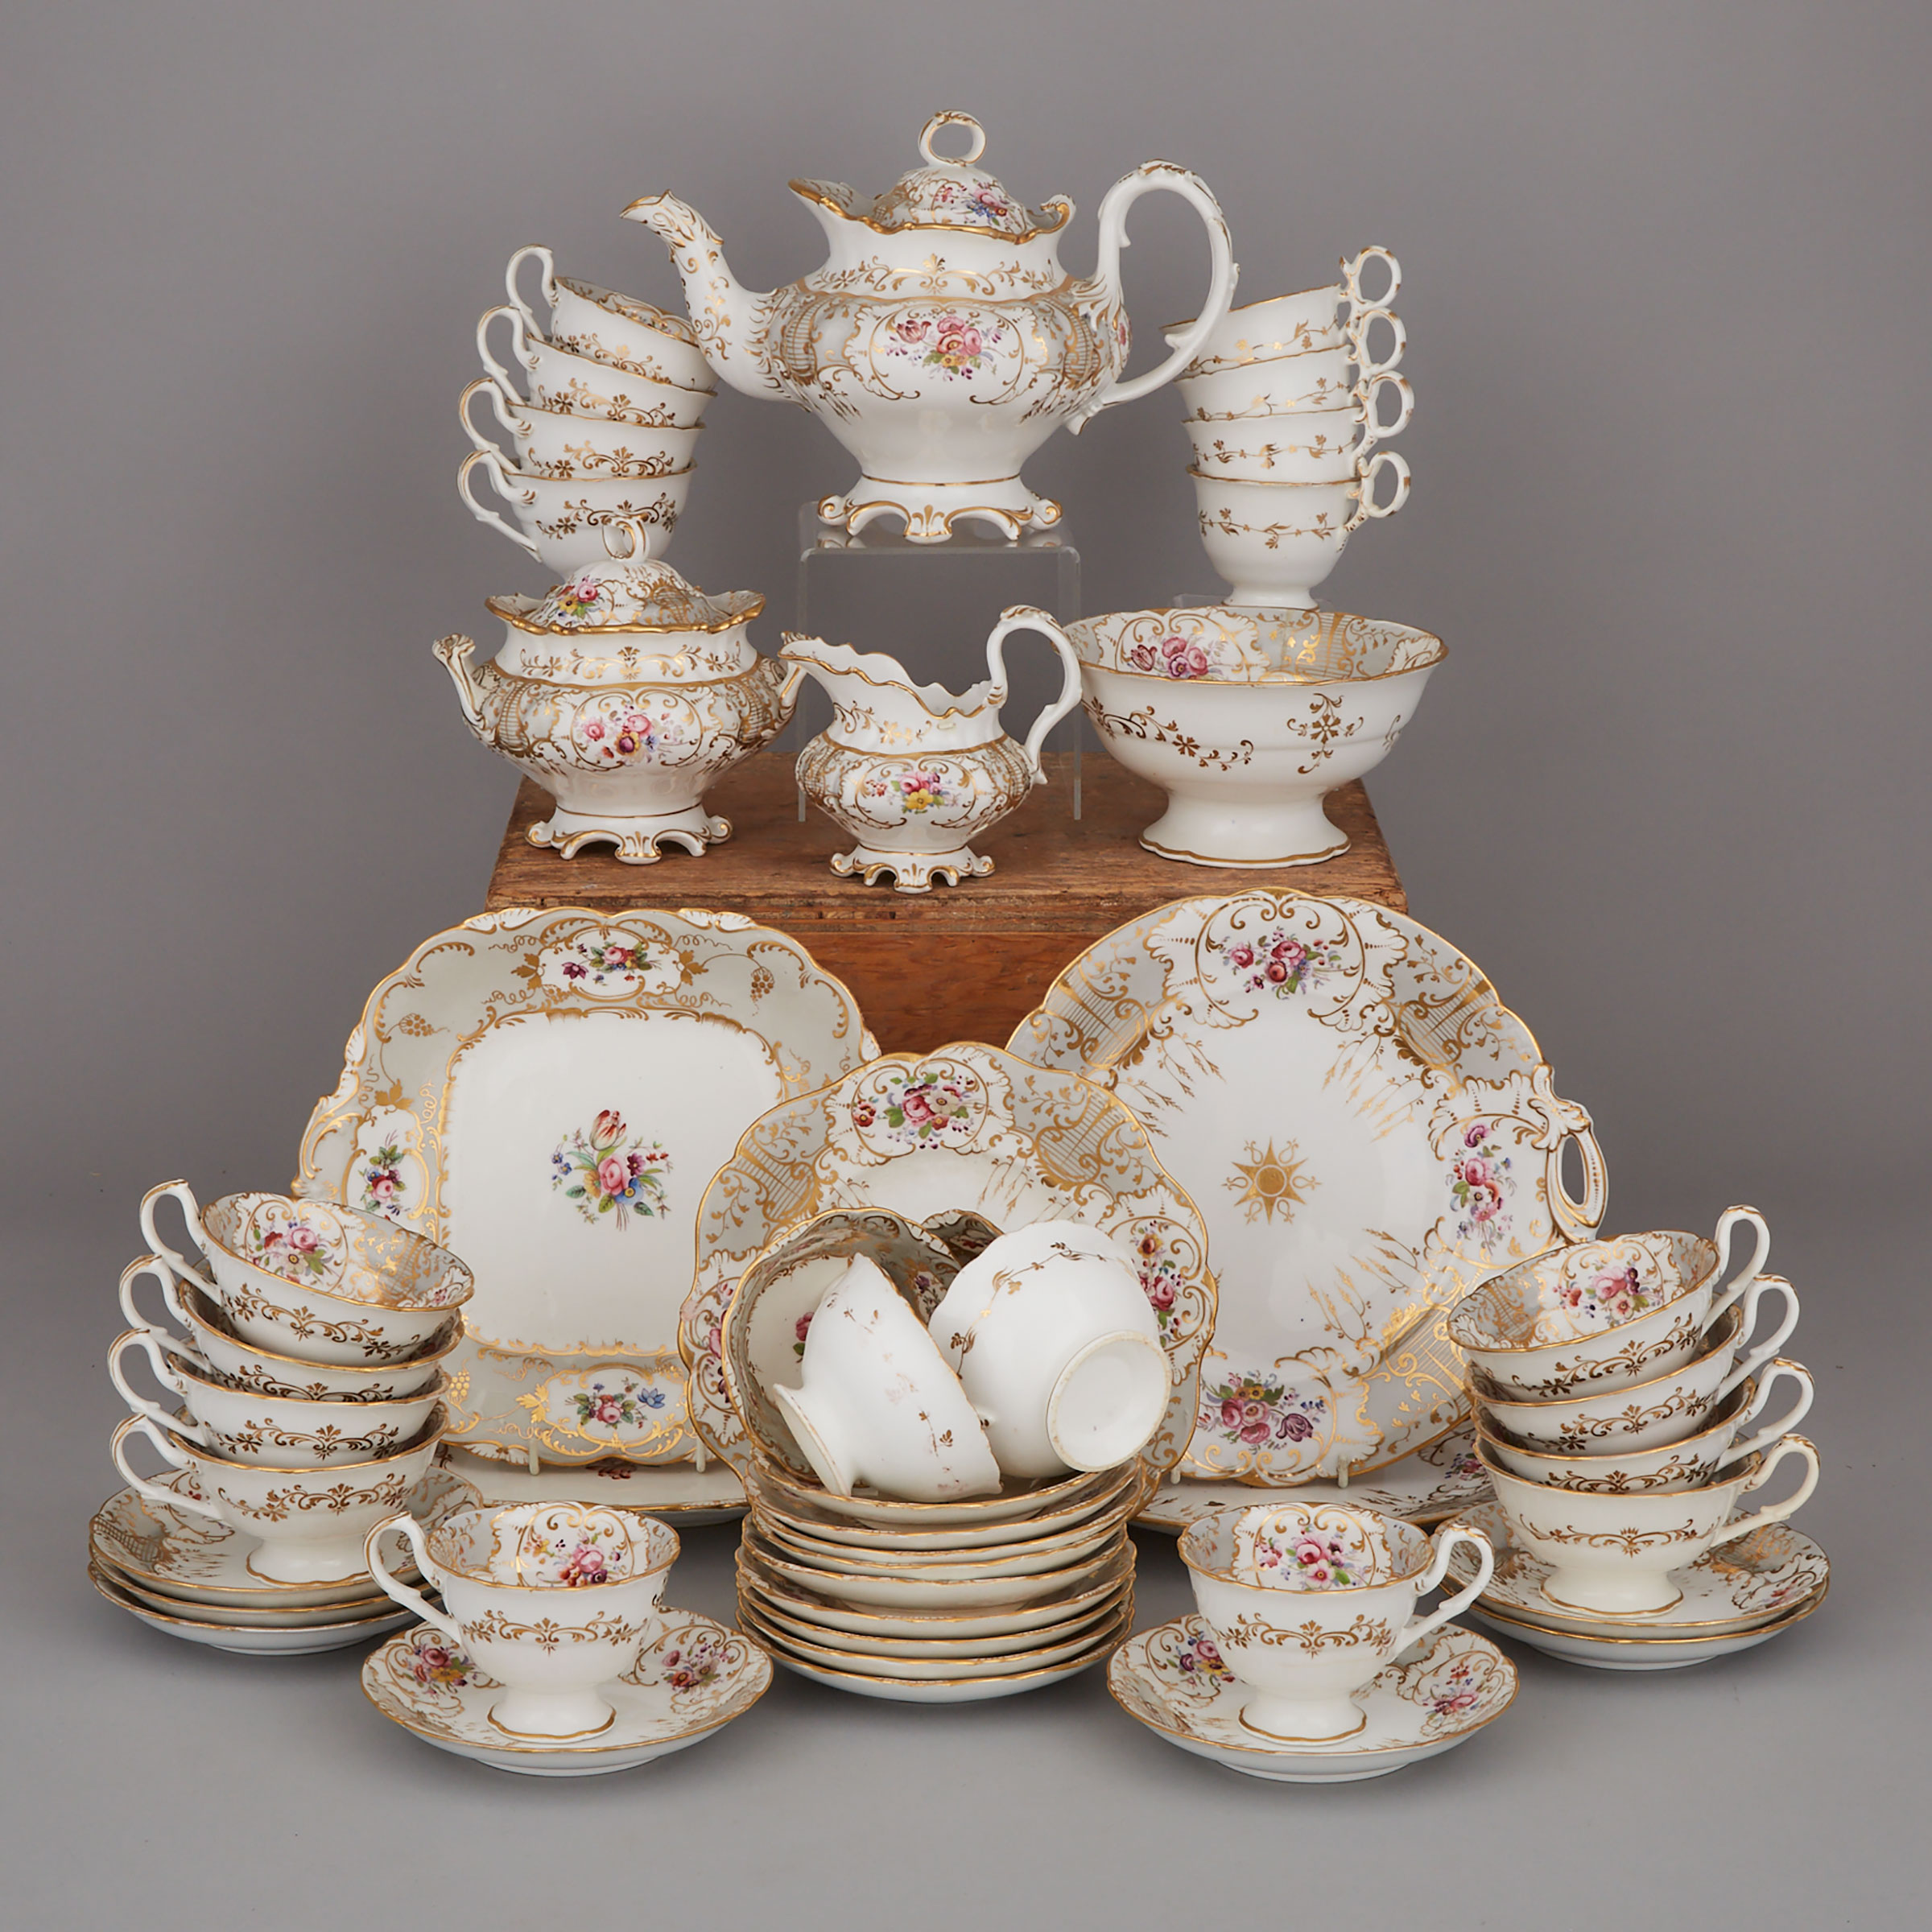 Assembled English Porcelain Grey and Gilt Ground Floral Decorated Tea Service, mid-19th century